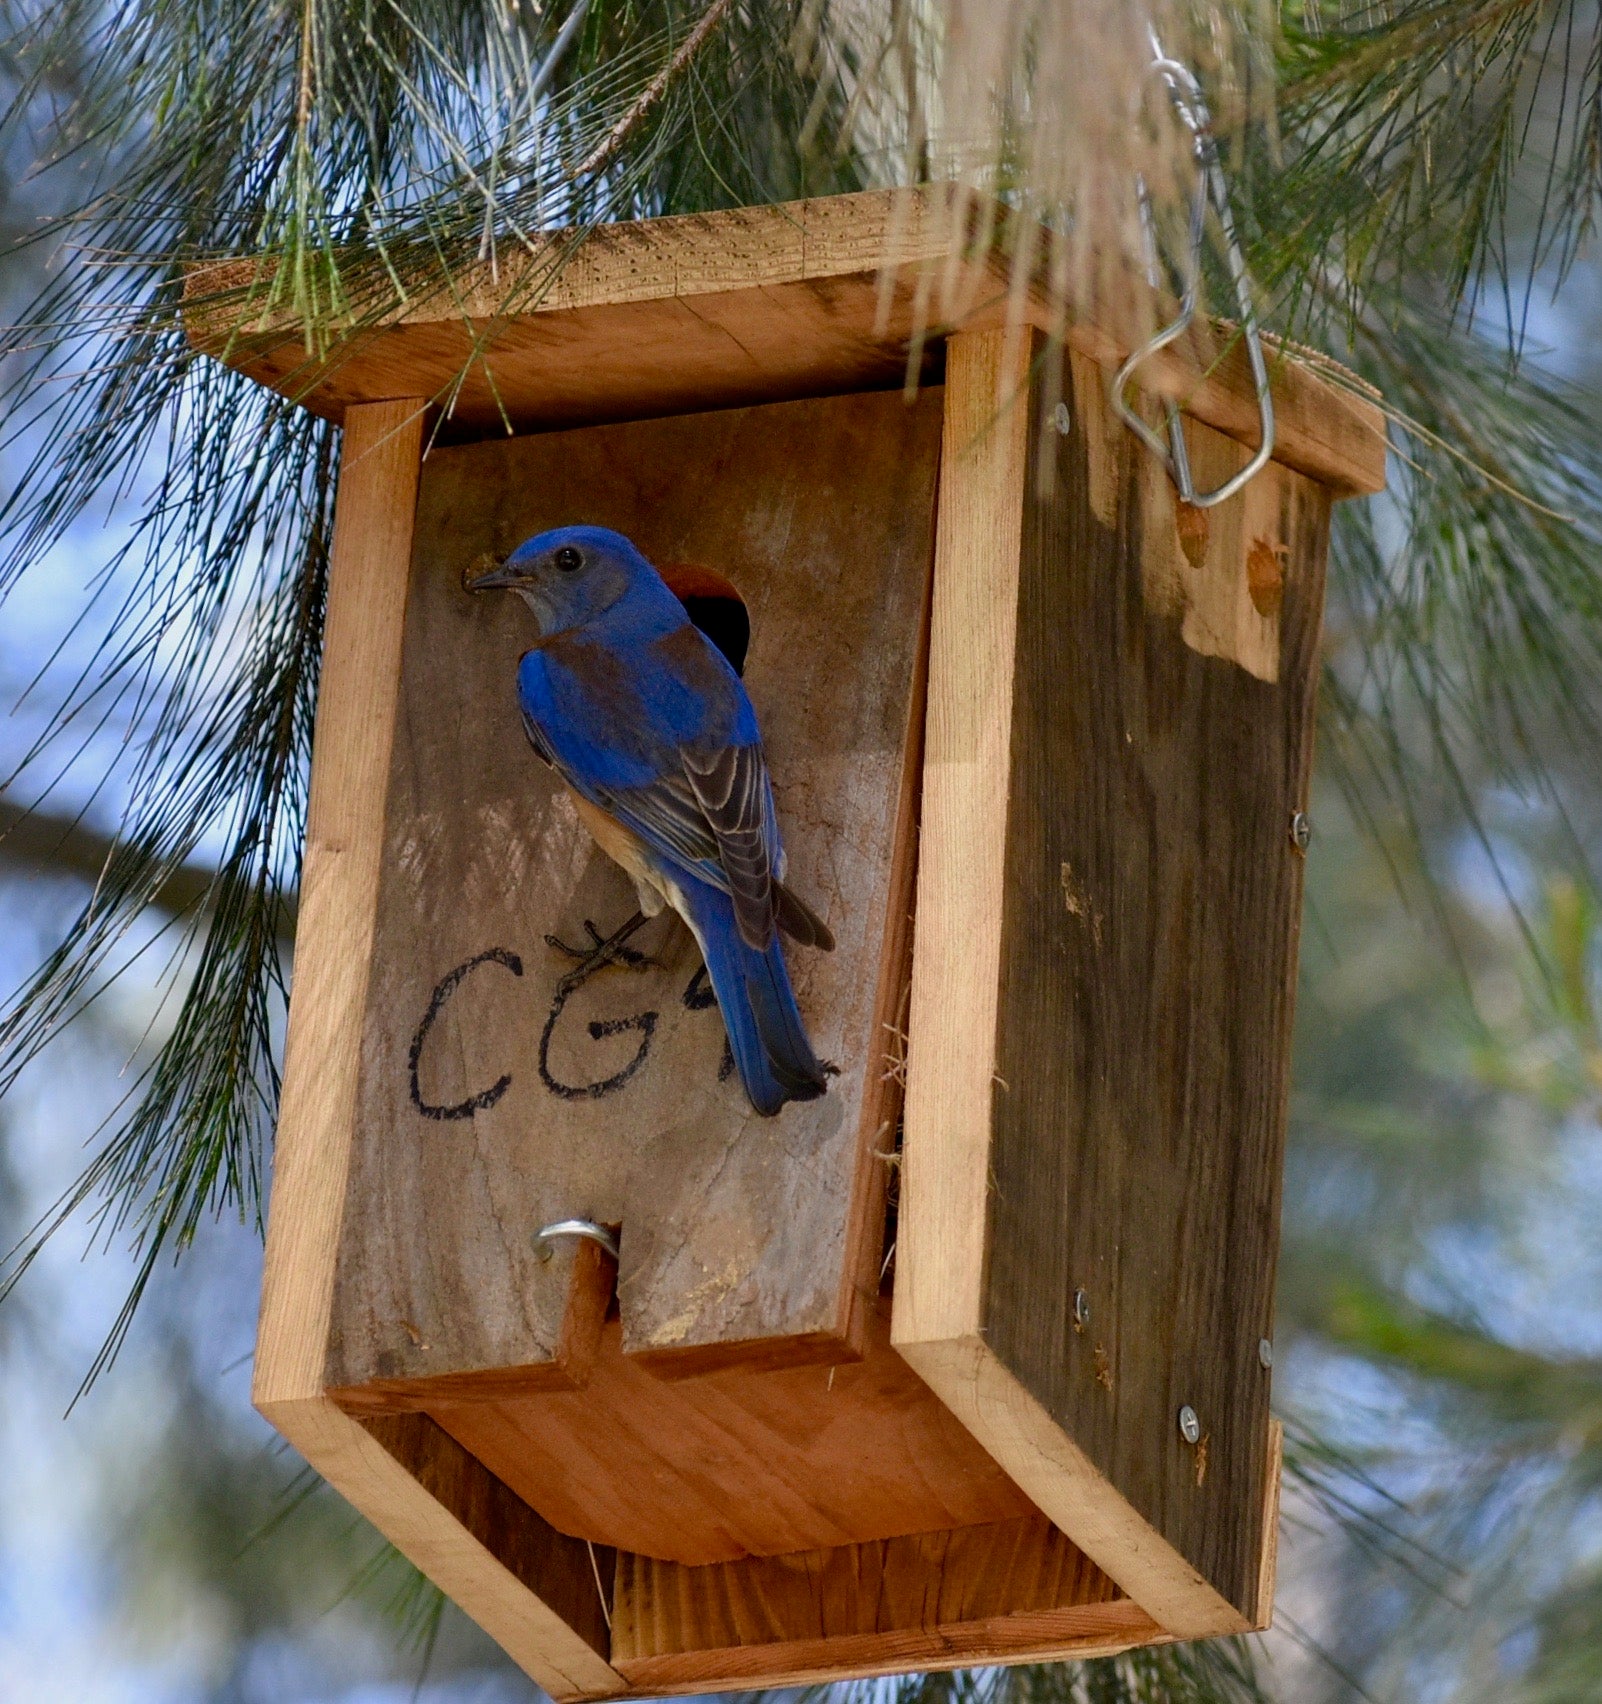 western bluebird sits in a wooden nestbox hanging in tree